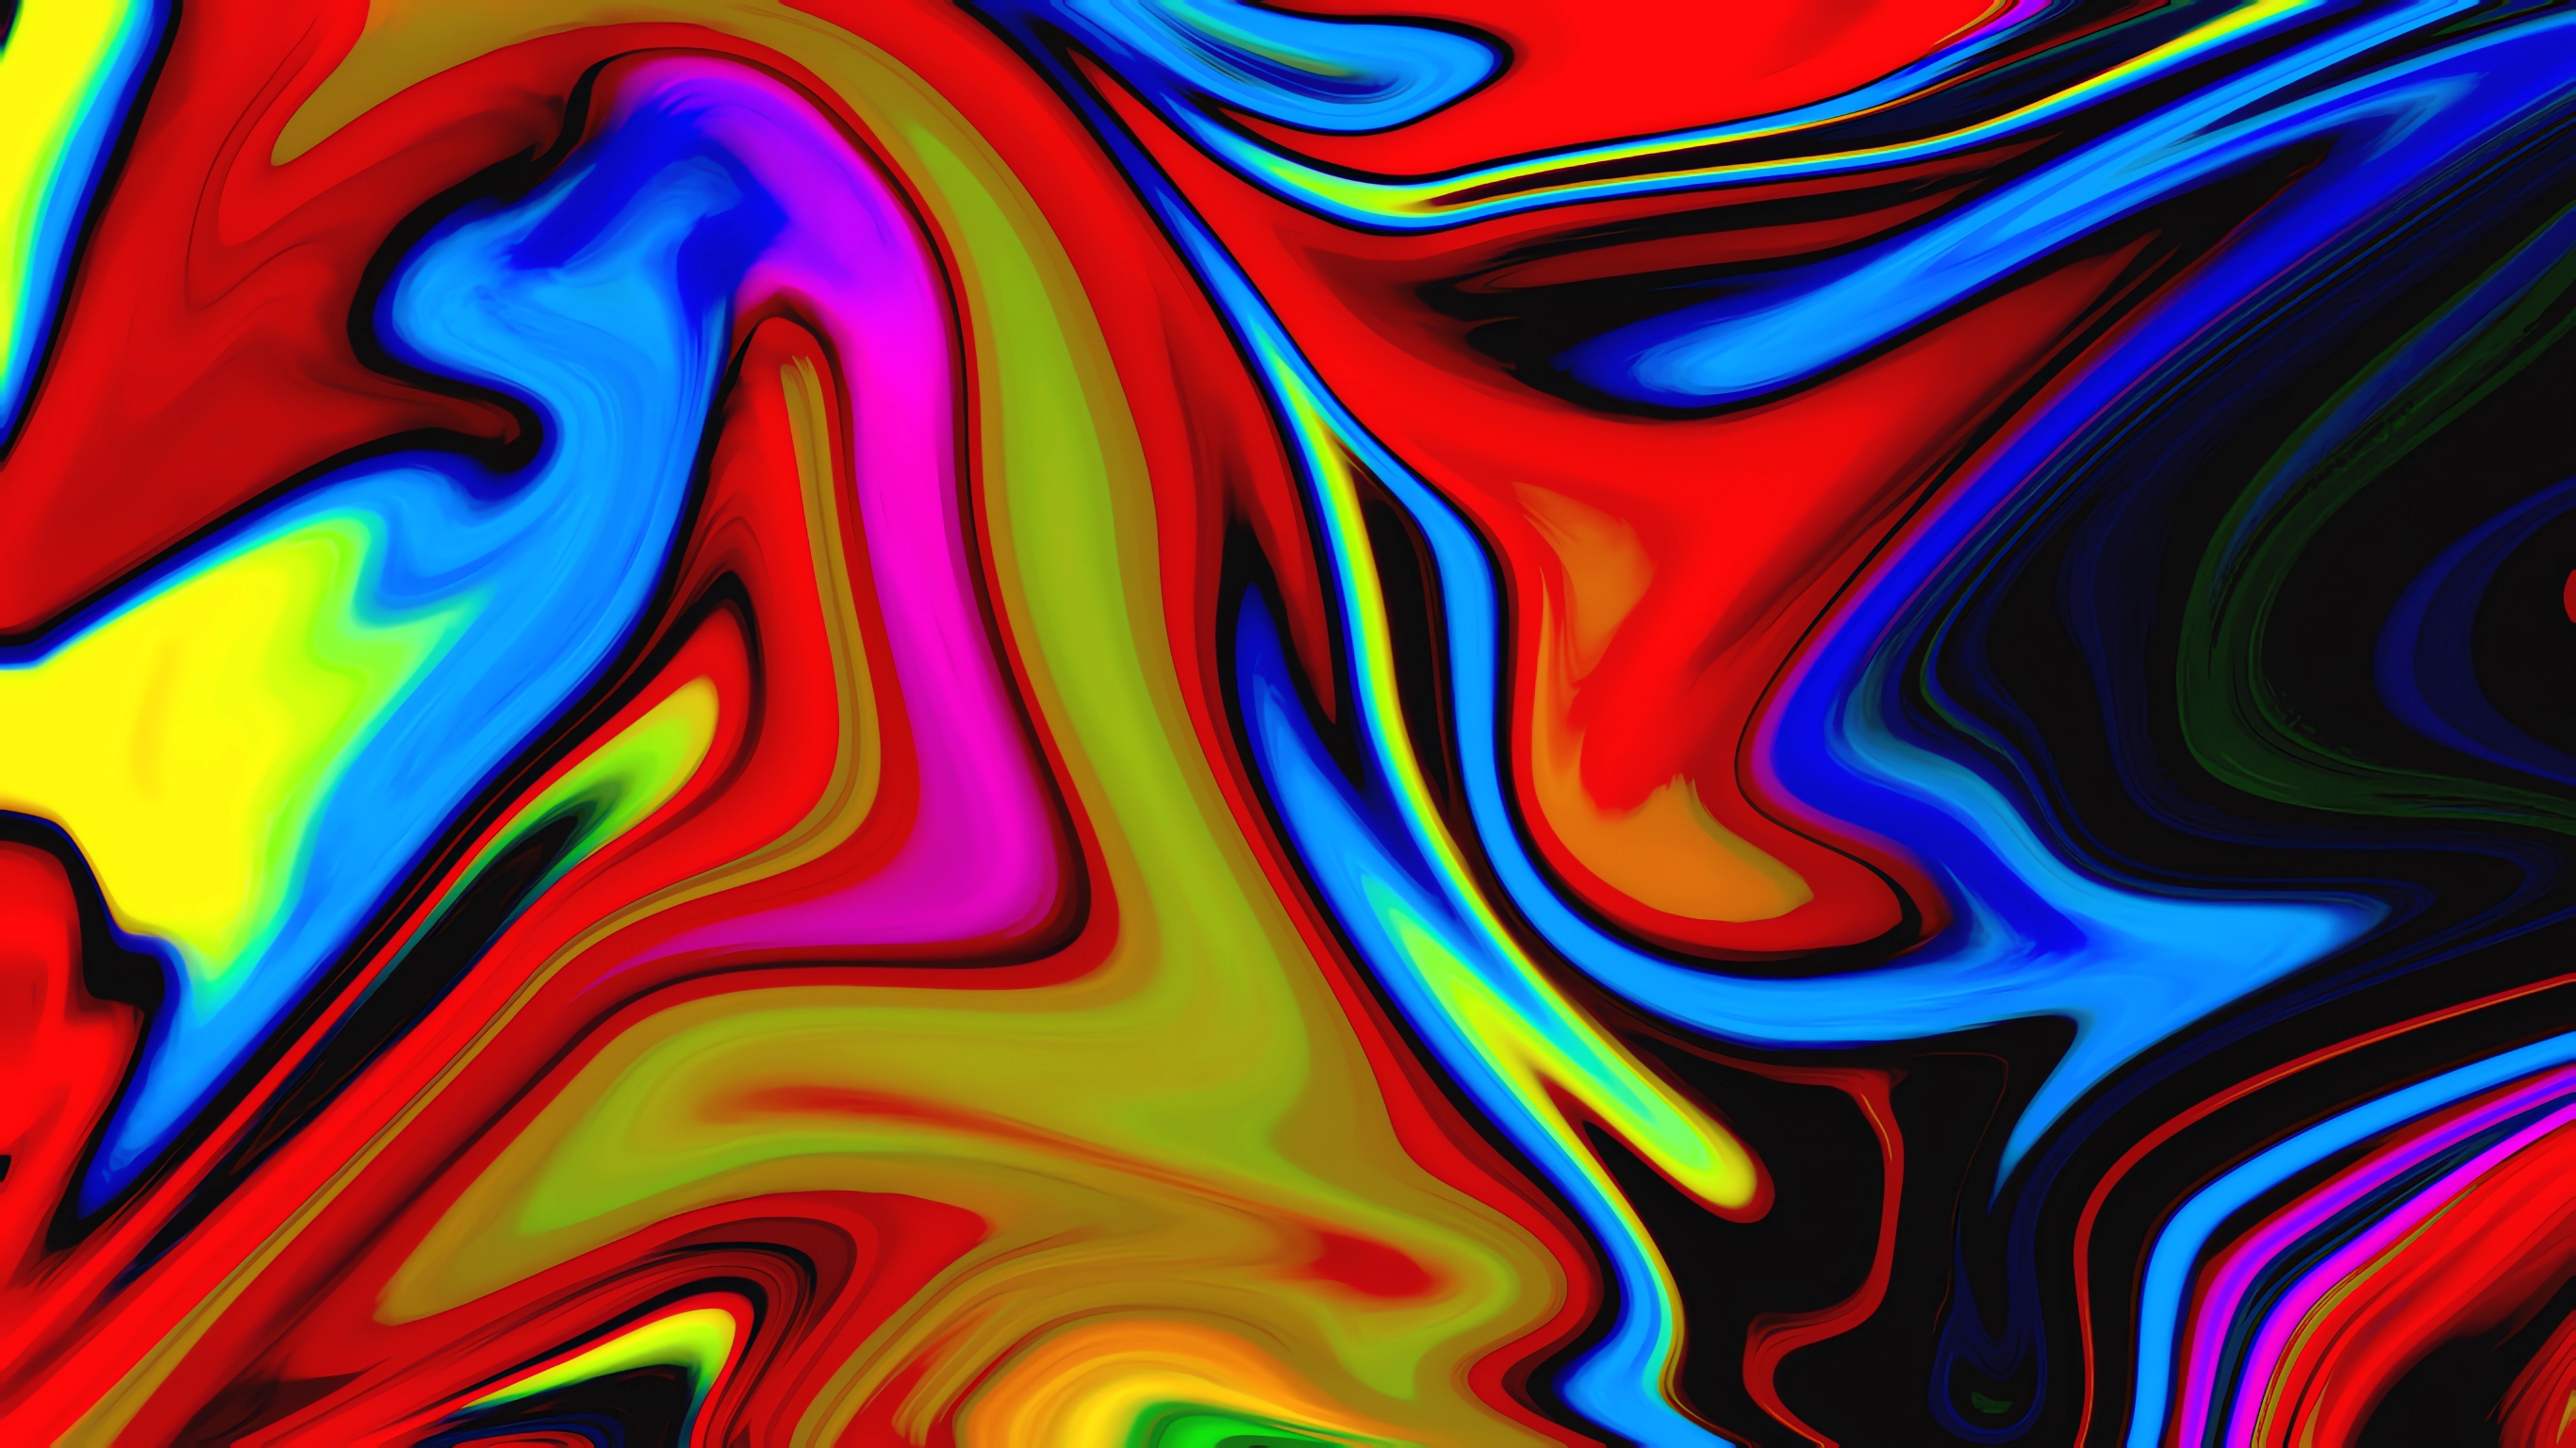 General 2732x1536 abstract digital art minimalism colorful simple background